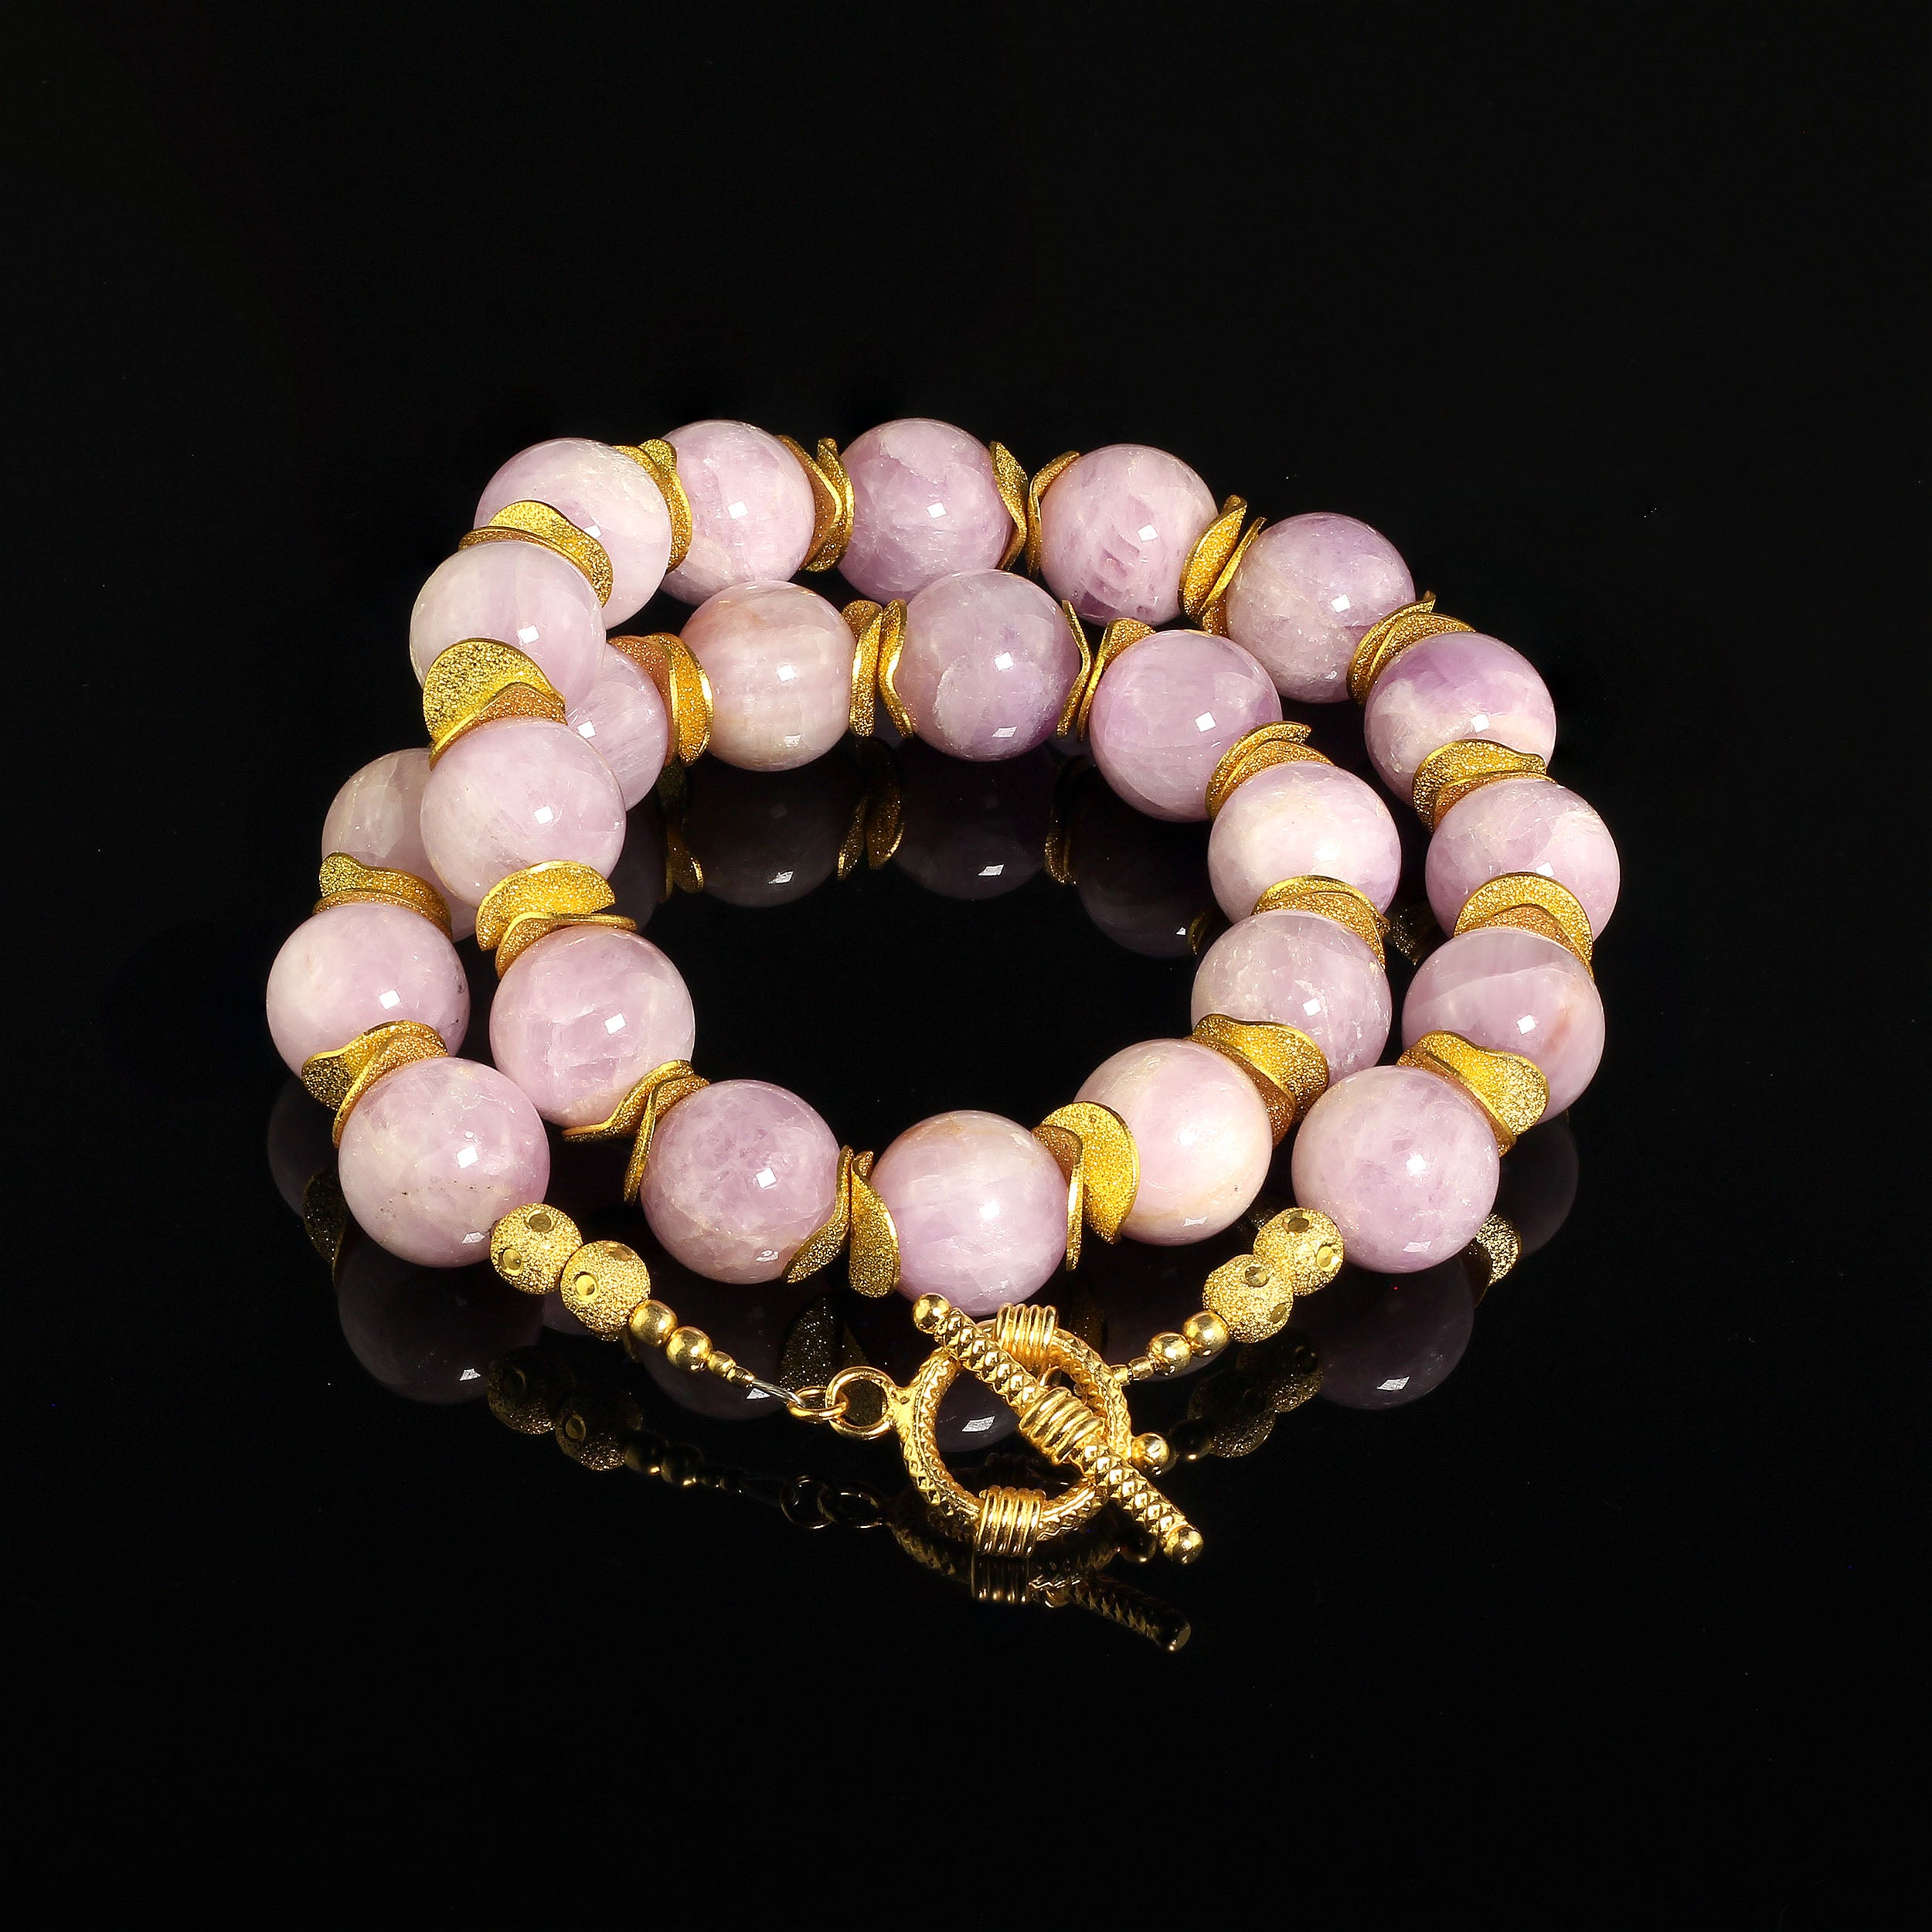 AJD Pink Kunzite with Goldy Accents 16 Inch Necklace